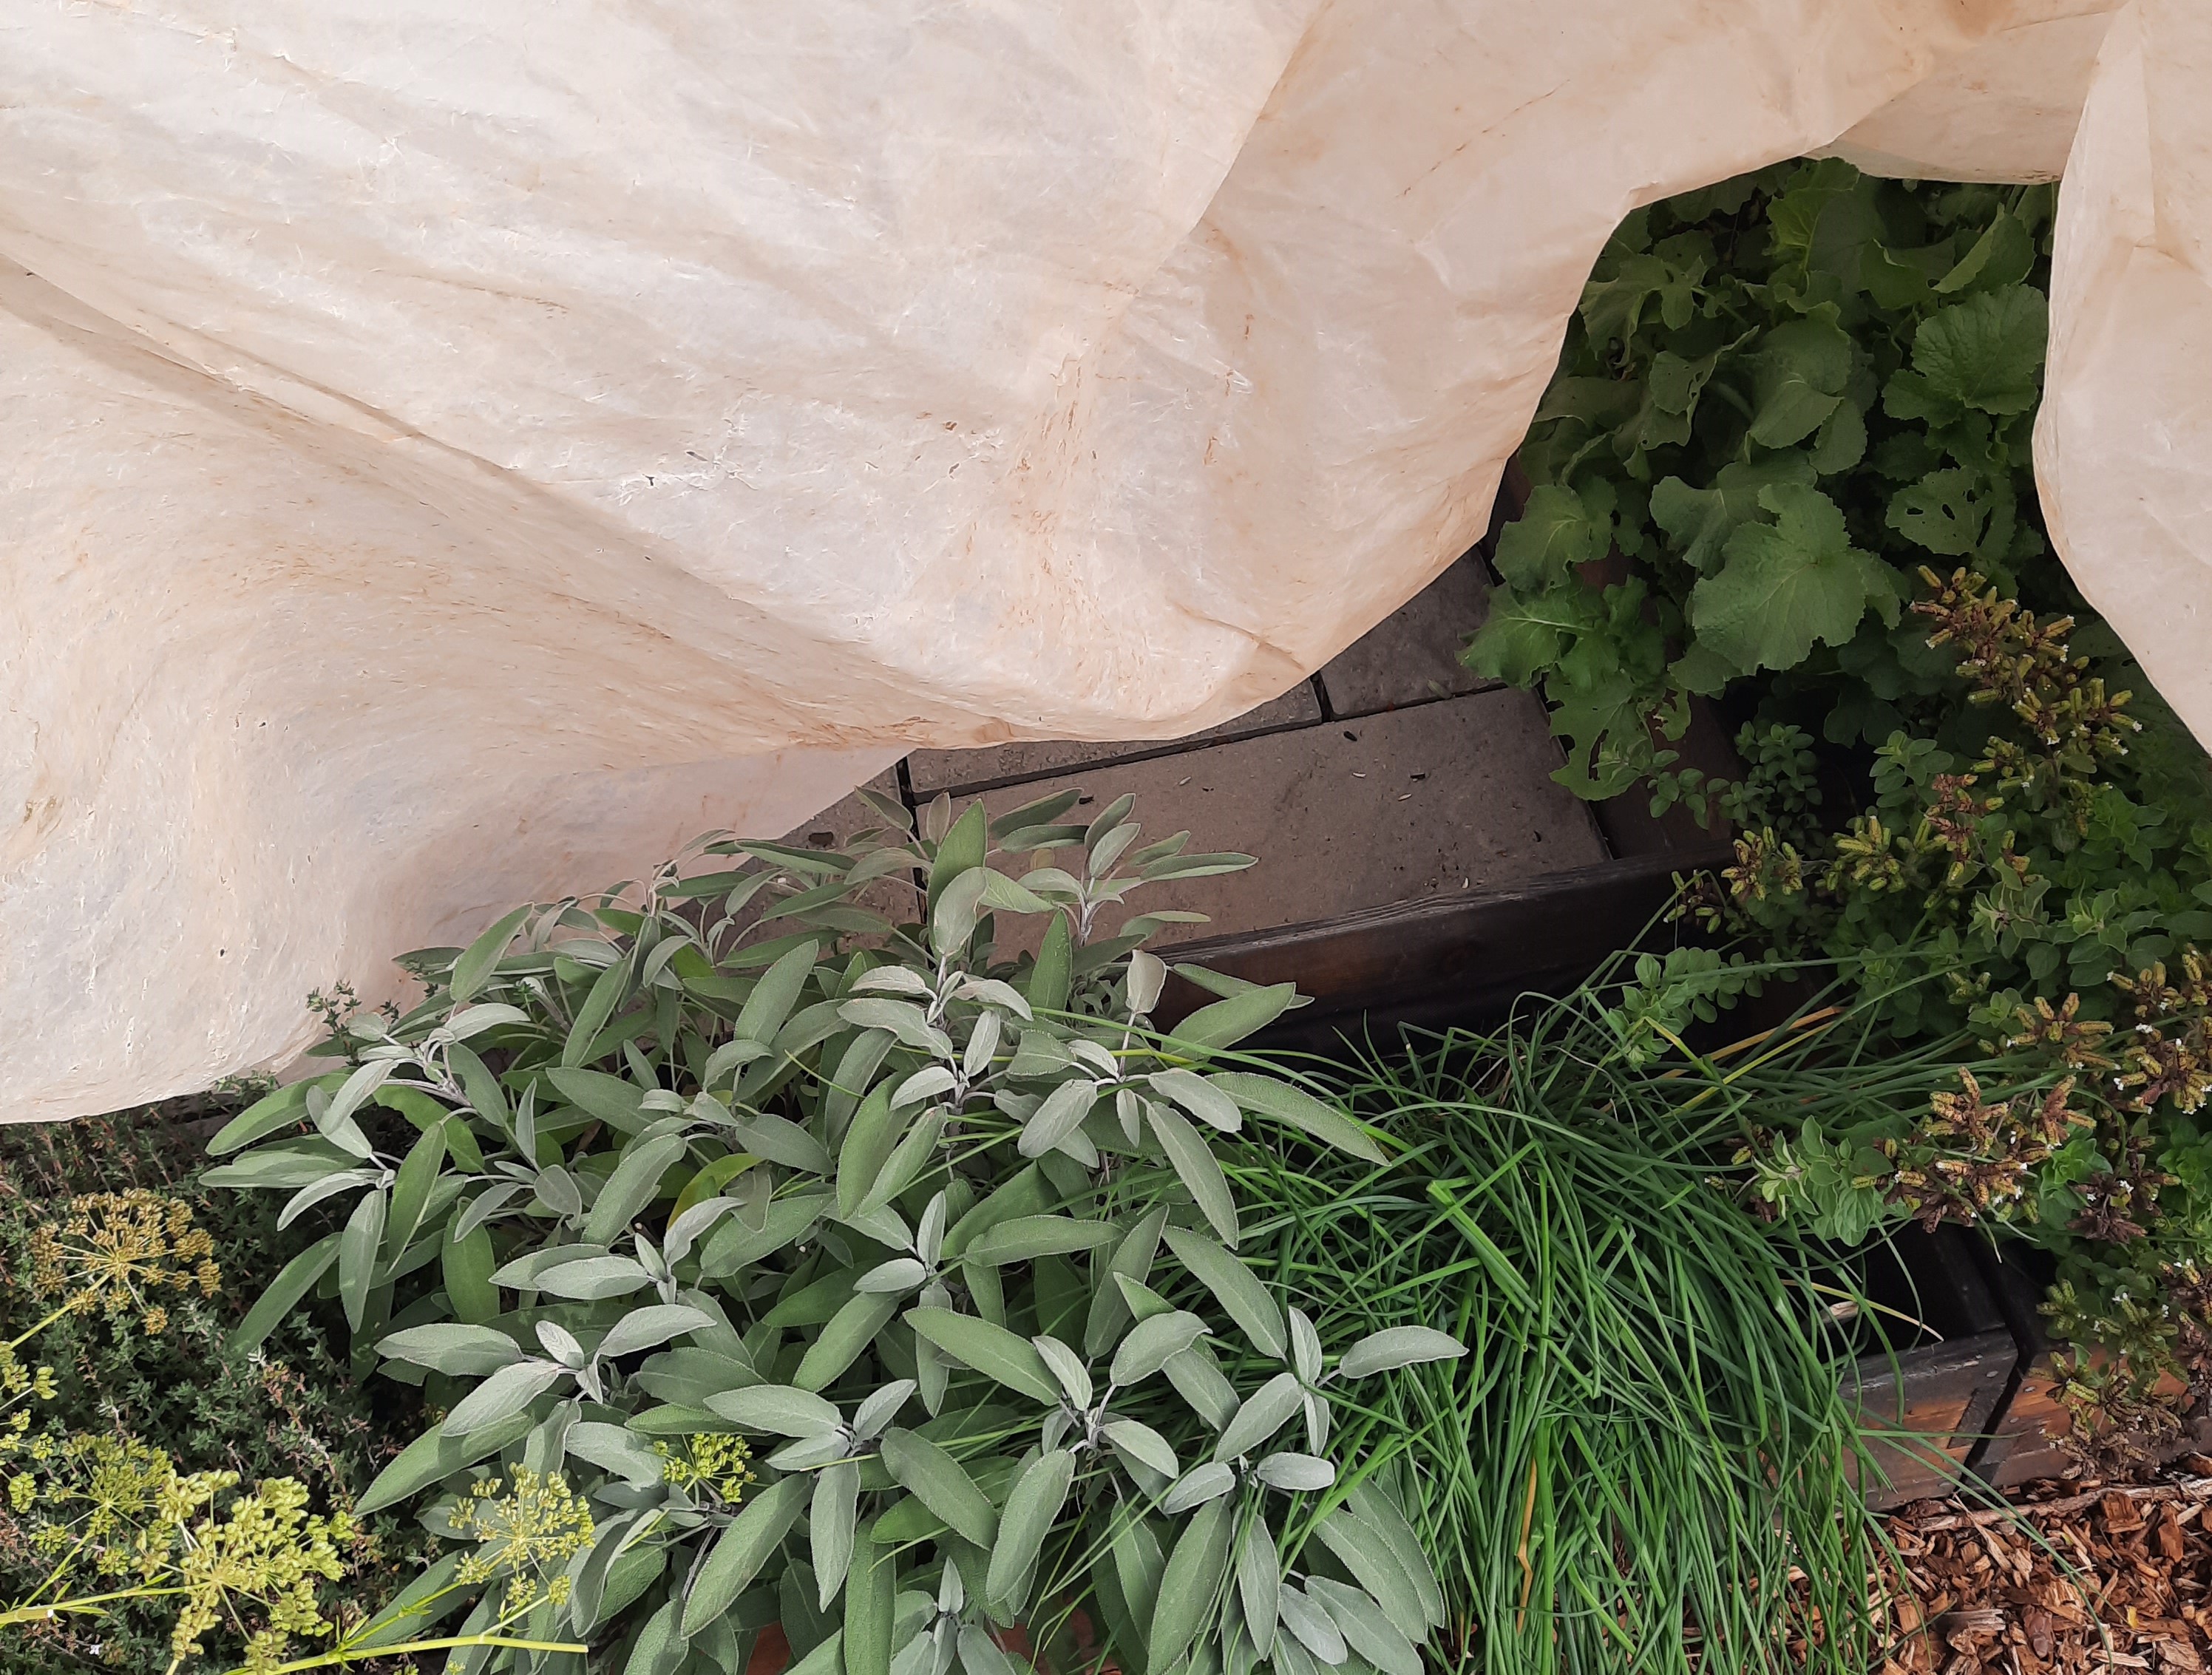 Herb plants underneath plastic covering